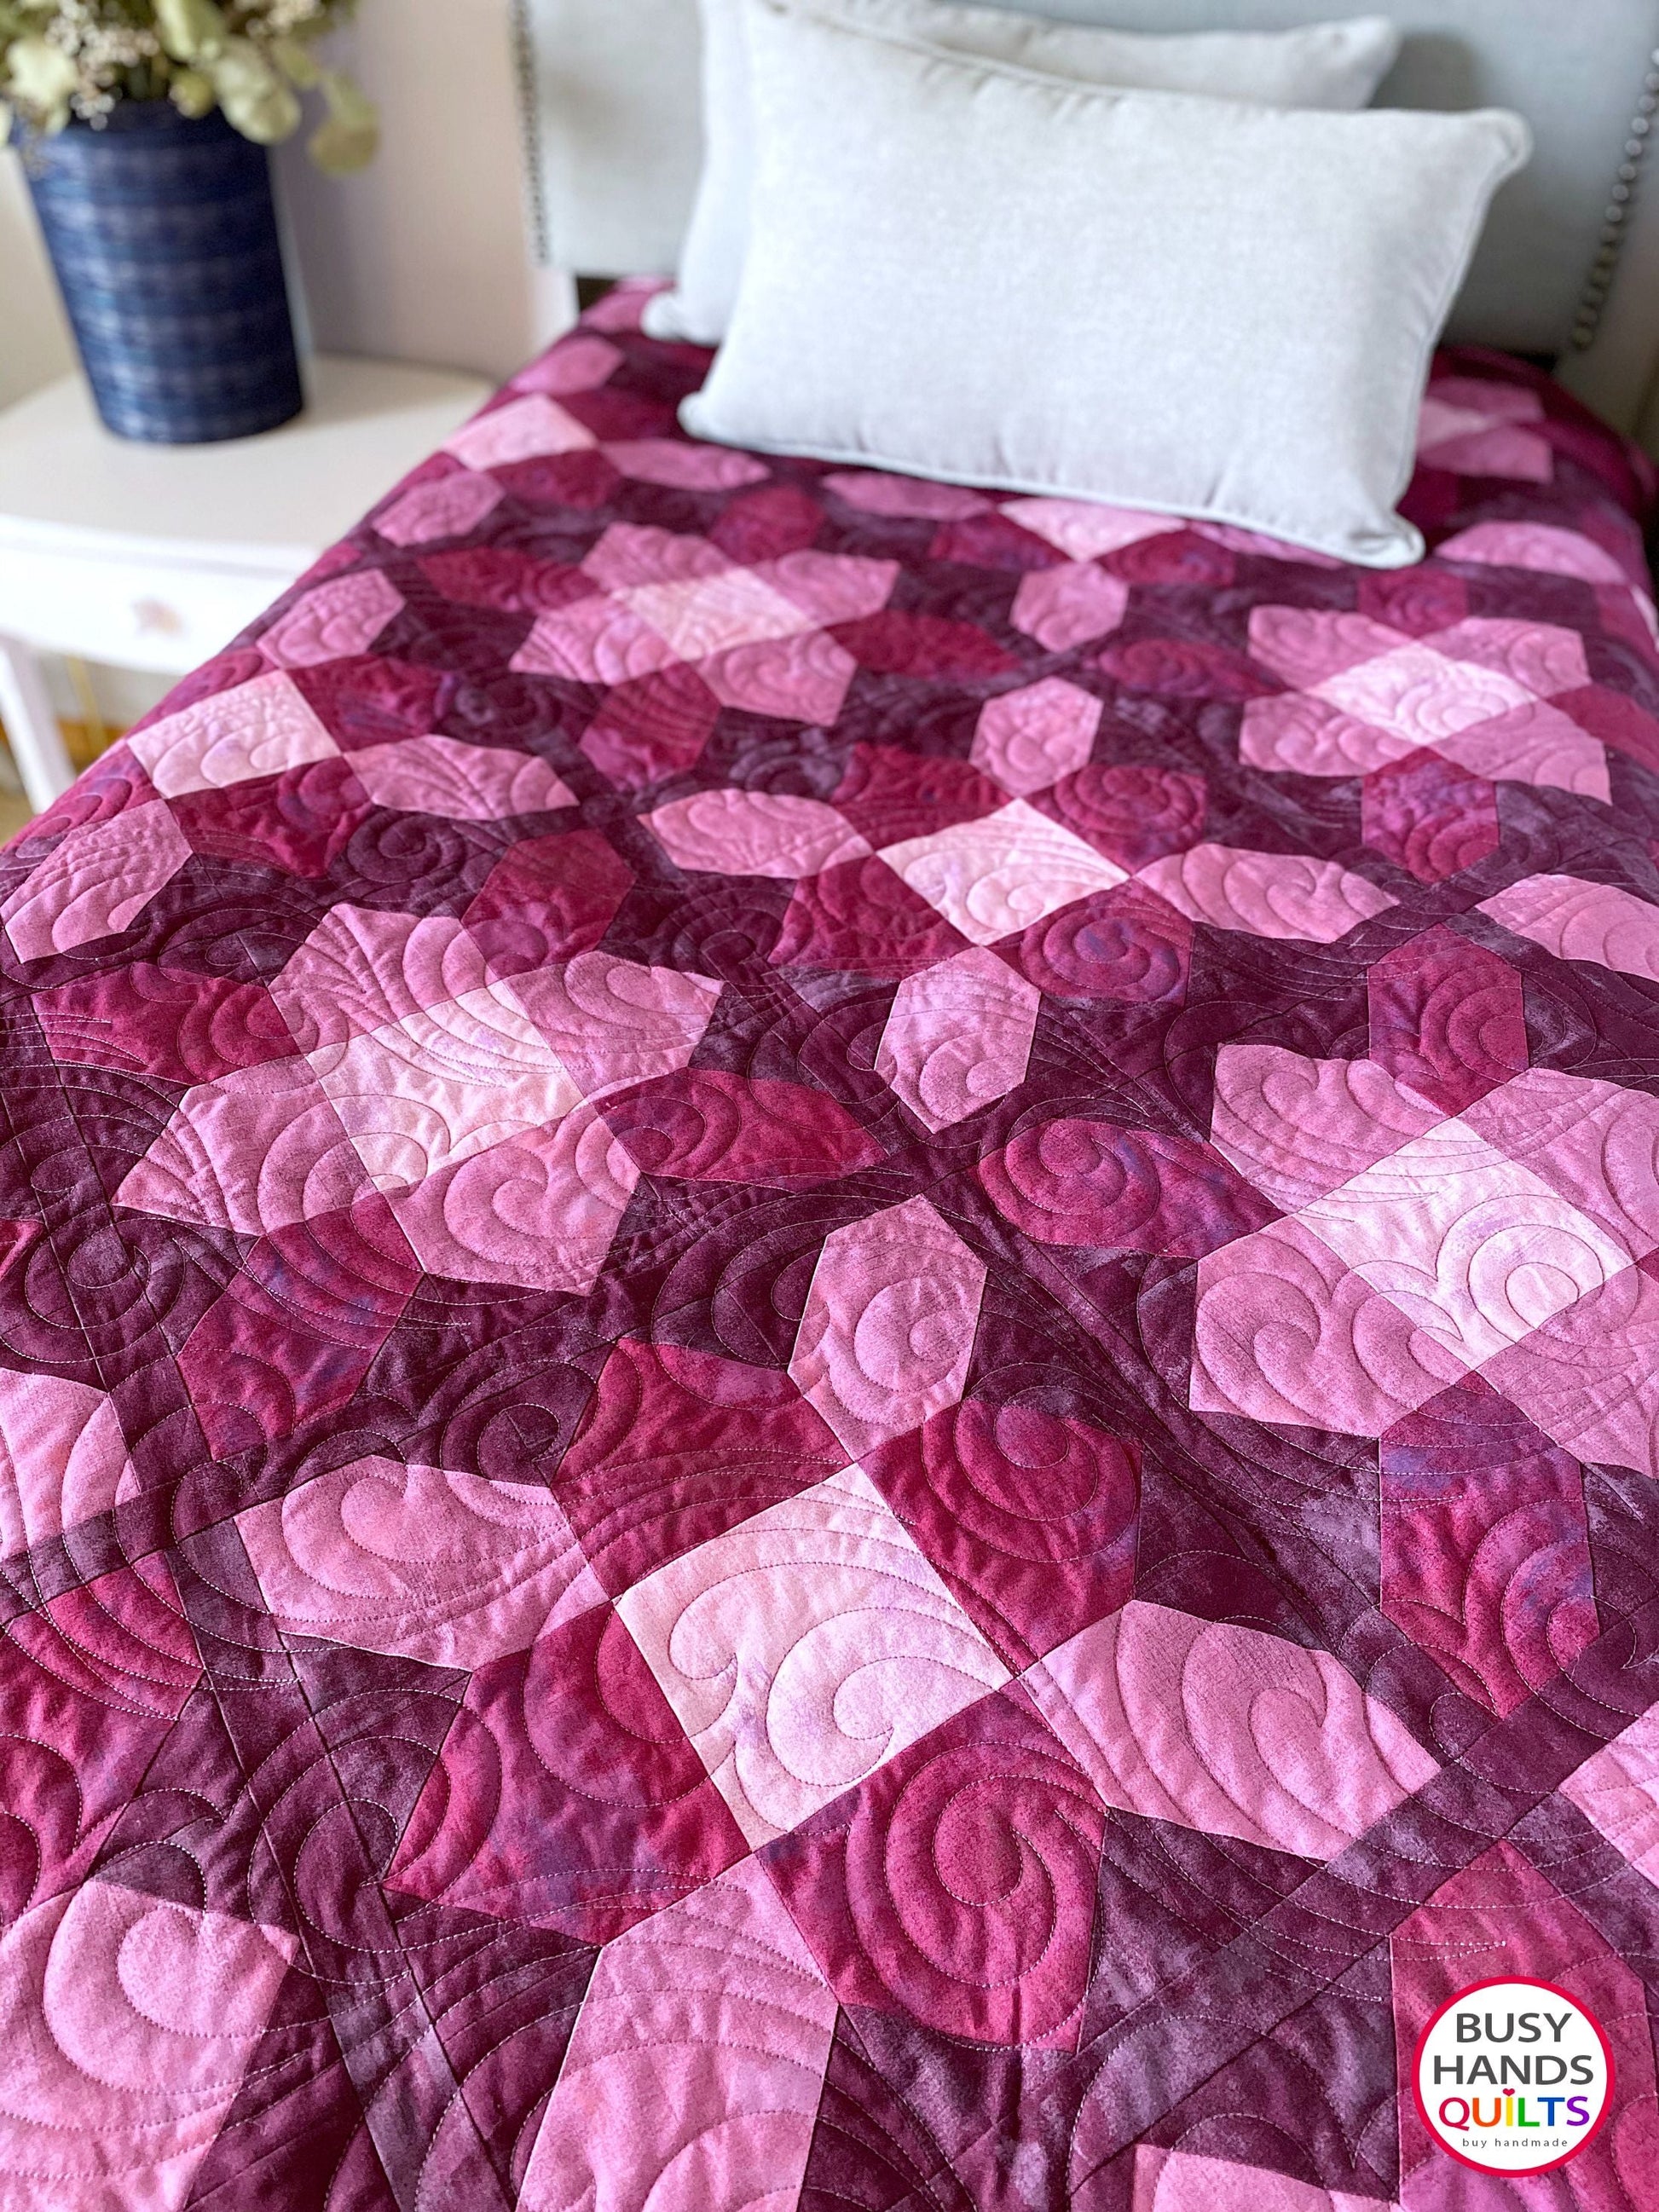 Sweet Comfort Quilt Pattern PDF DOWNLOAD Busy Hands Quilts $12.99